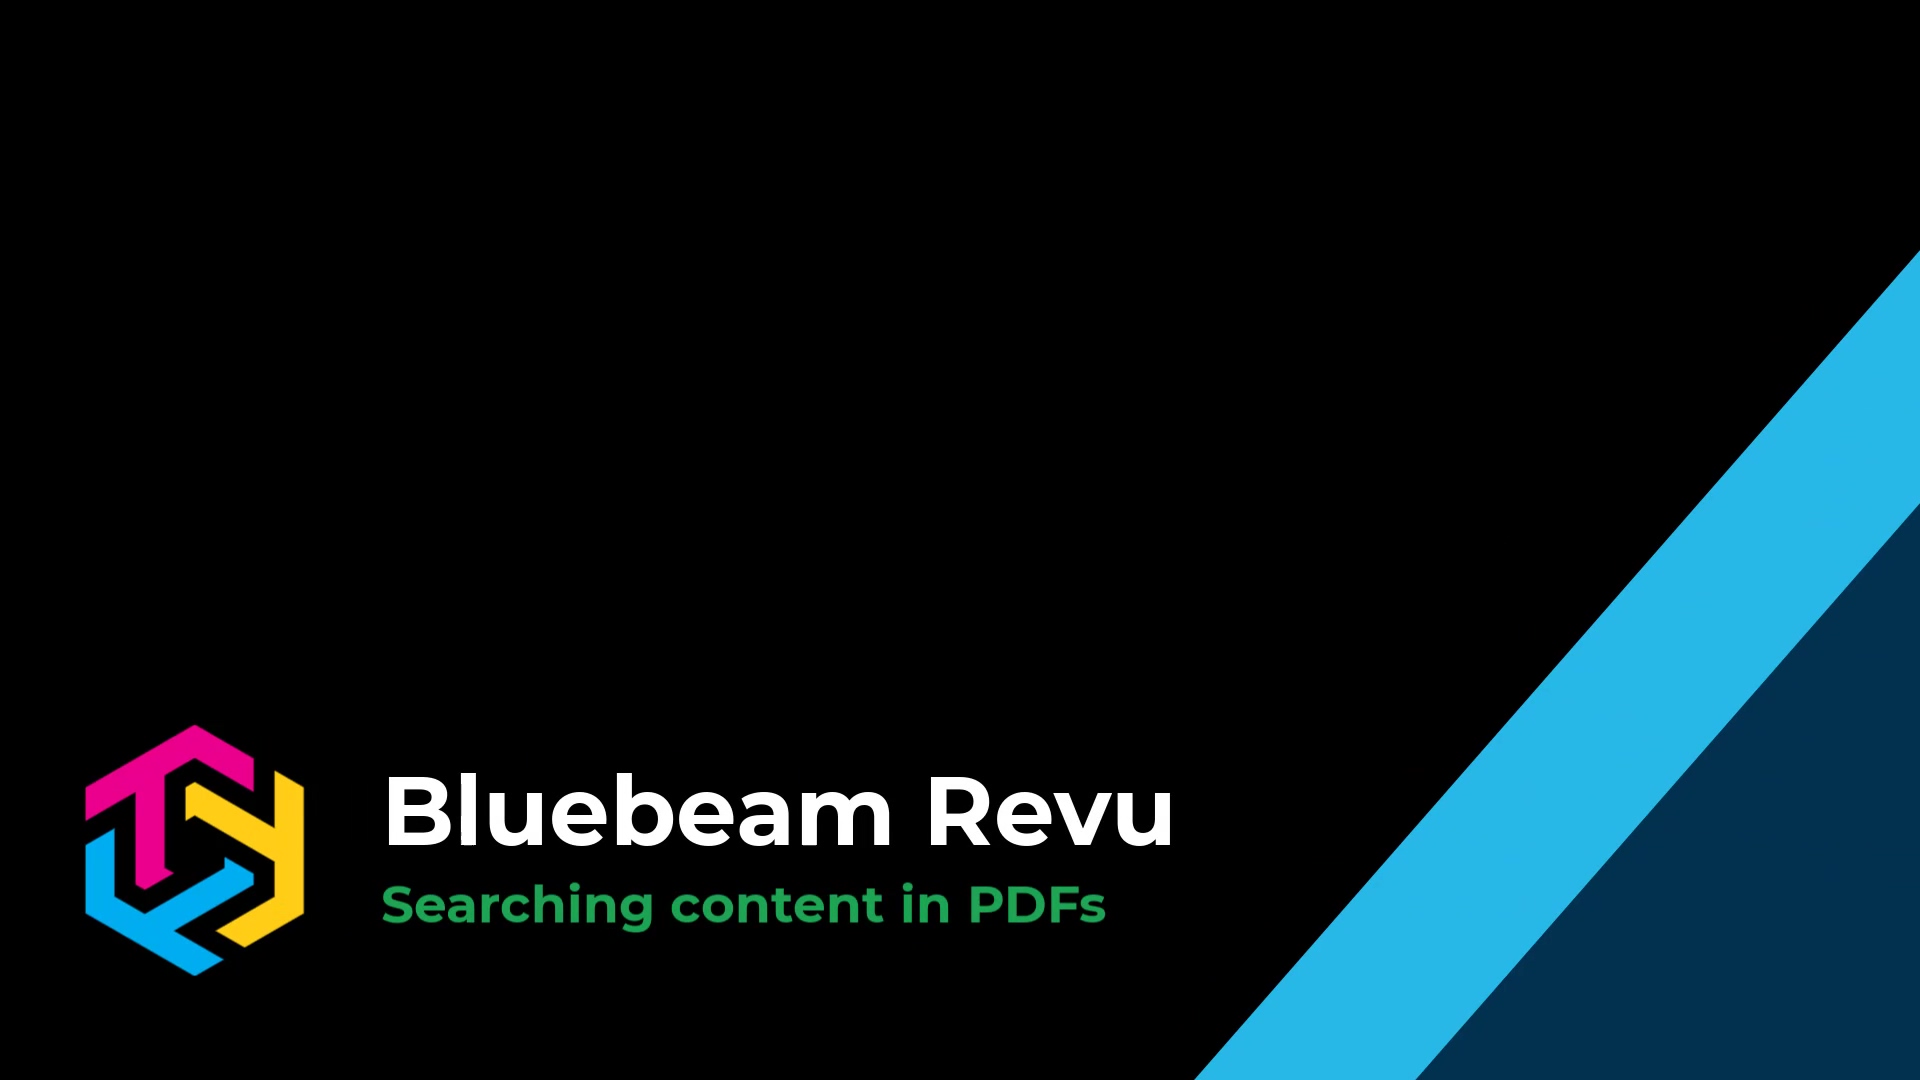 Searching PDFs in Bluebeam Revu 2019